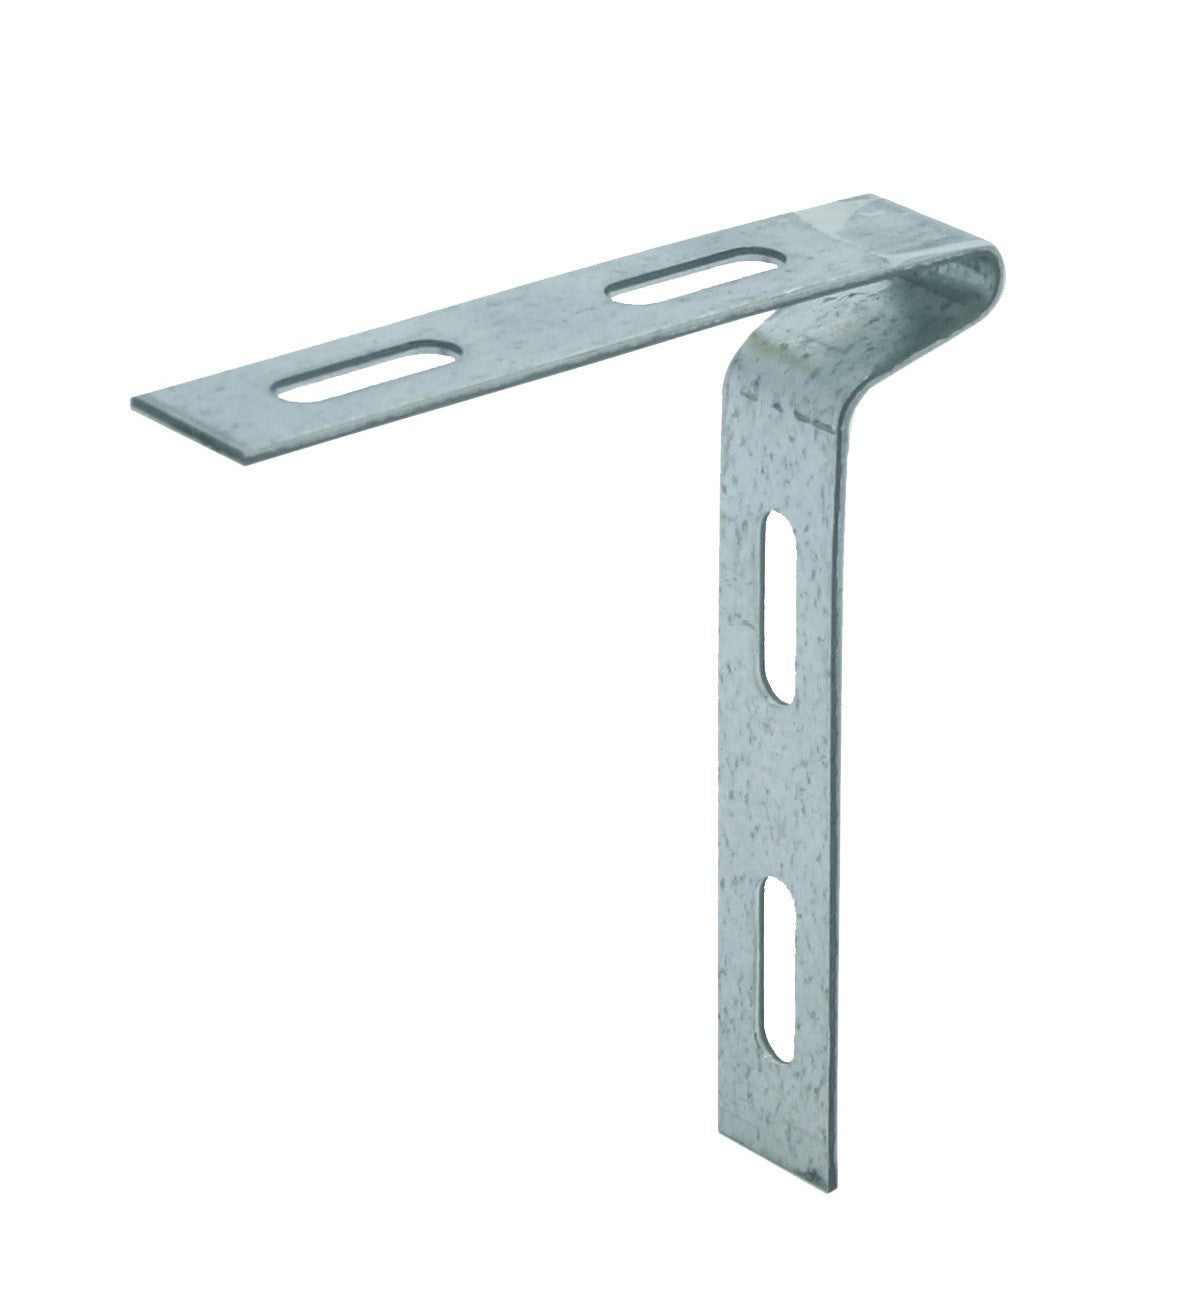 Ceiling spring anchor 110x115mm